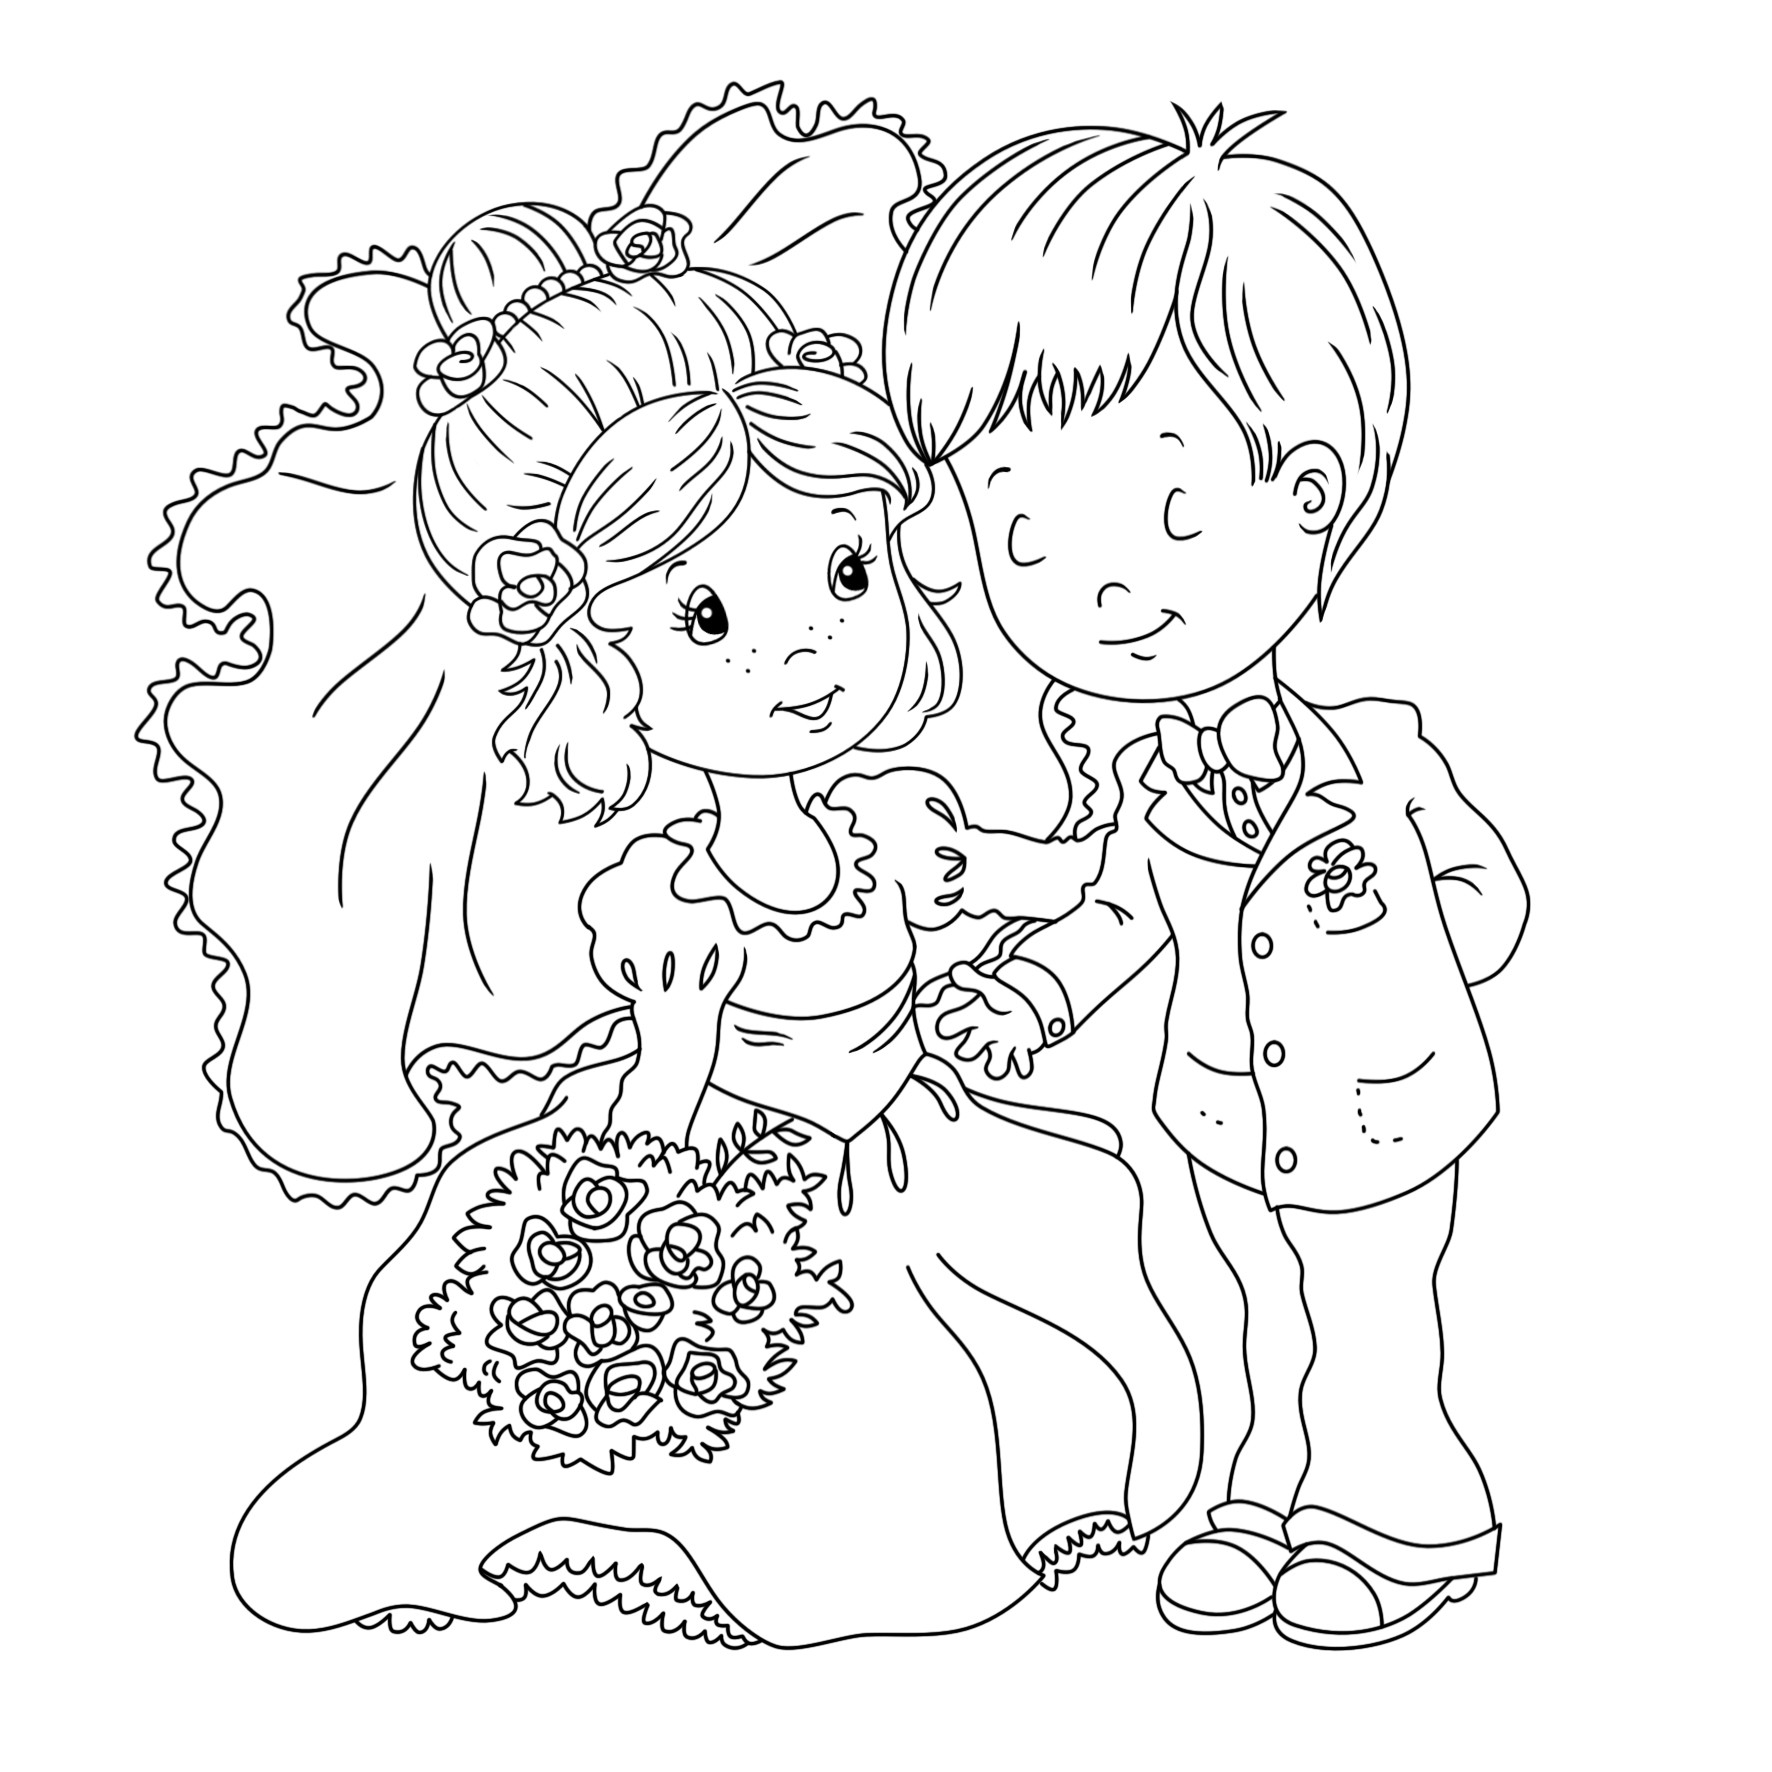 Kids Wedding Coloring Book
 Wedding Coloring Pages Best Coloring Pages For Kids